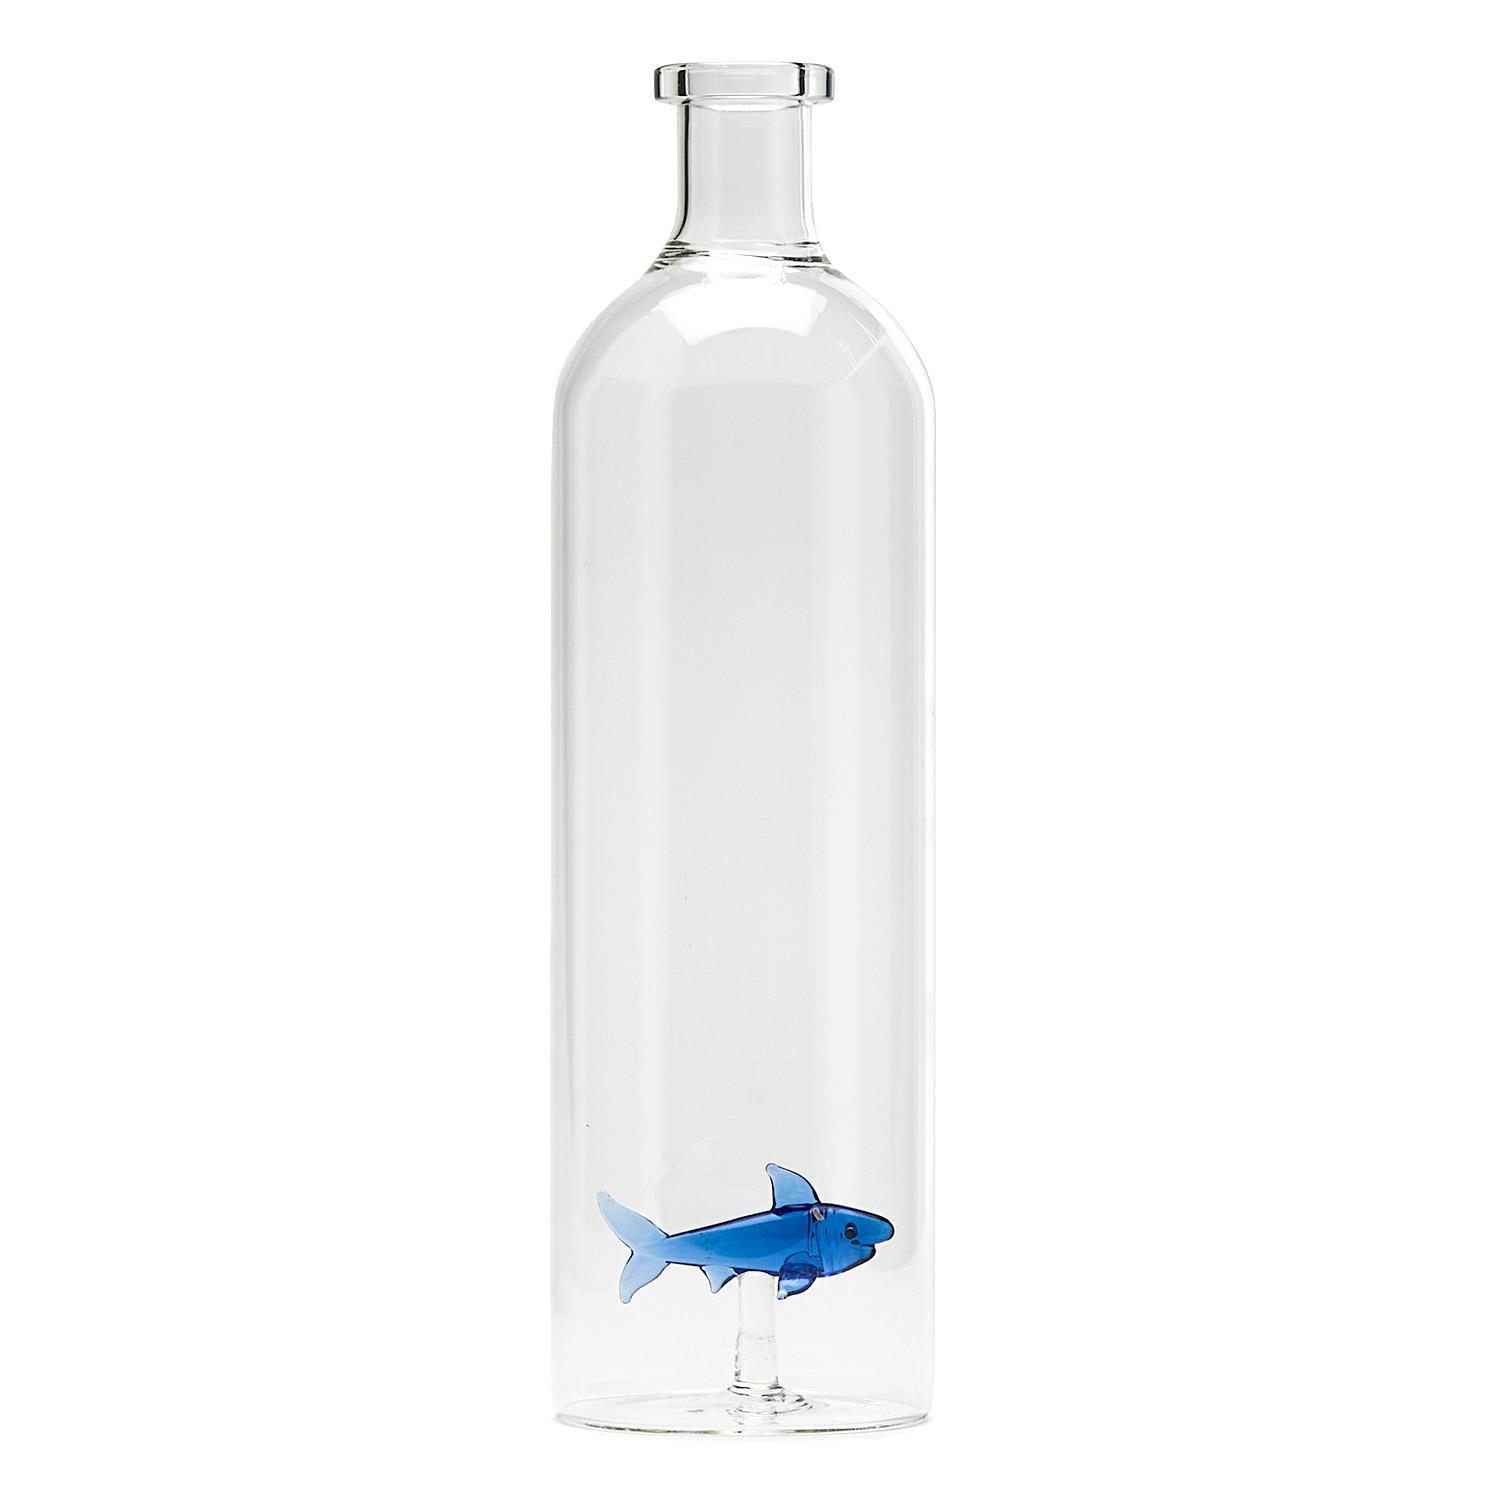 Two's Company Glass Bottle / Vase with Blue Shark Icon